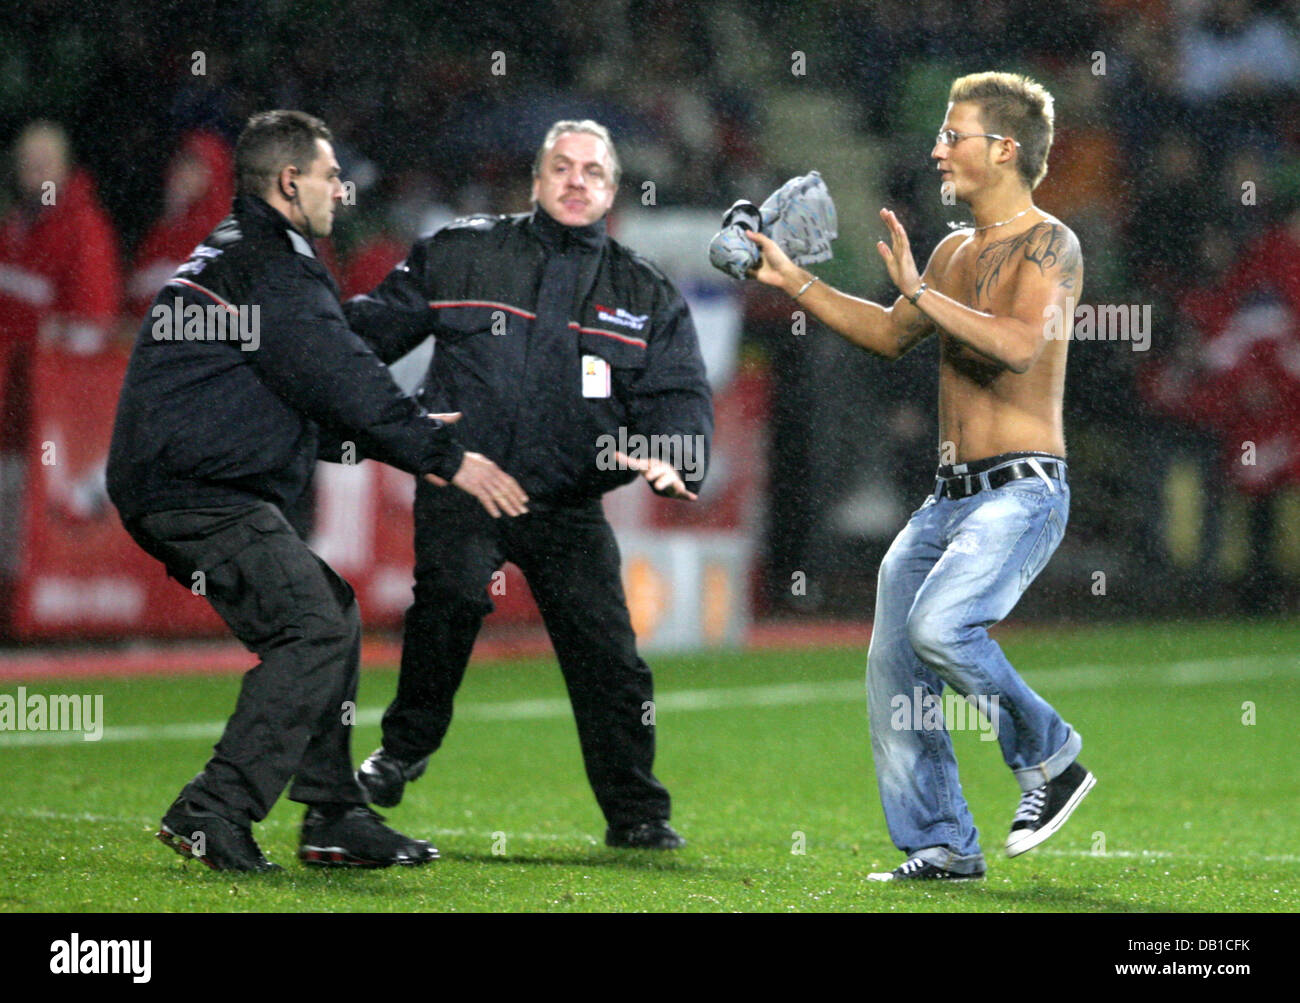 A streaker is caught by security personnel during the UEFA Cup group E match Bayer Leverkusen v Sparta Praha at BayArena in Leverkusen, Germany, 06 December 2007. Leverkusen defeated Sparta 1-0. Photo: Federico Gambarini Stock Photo